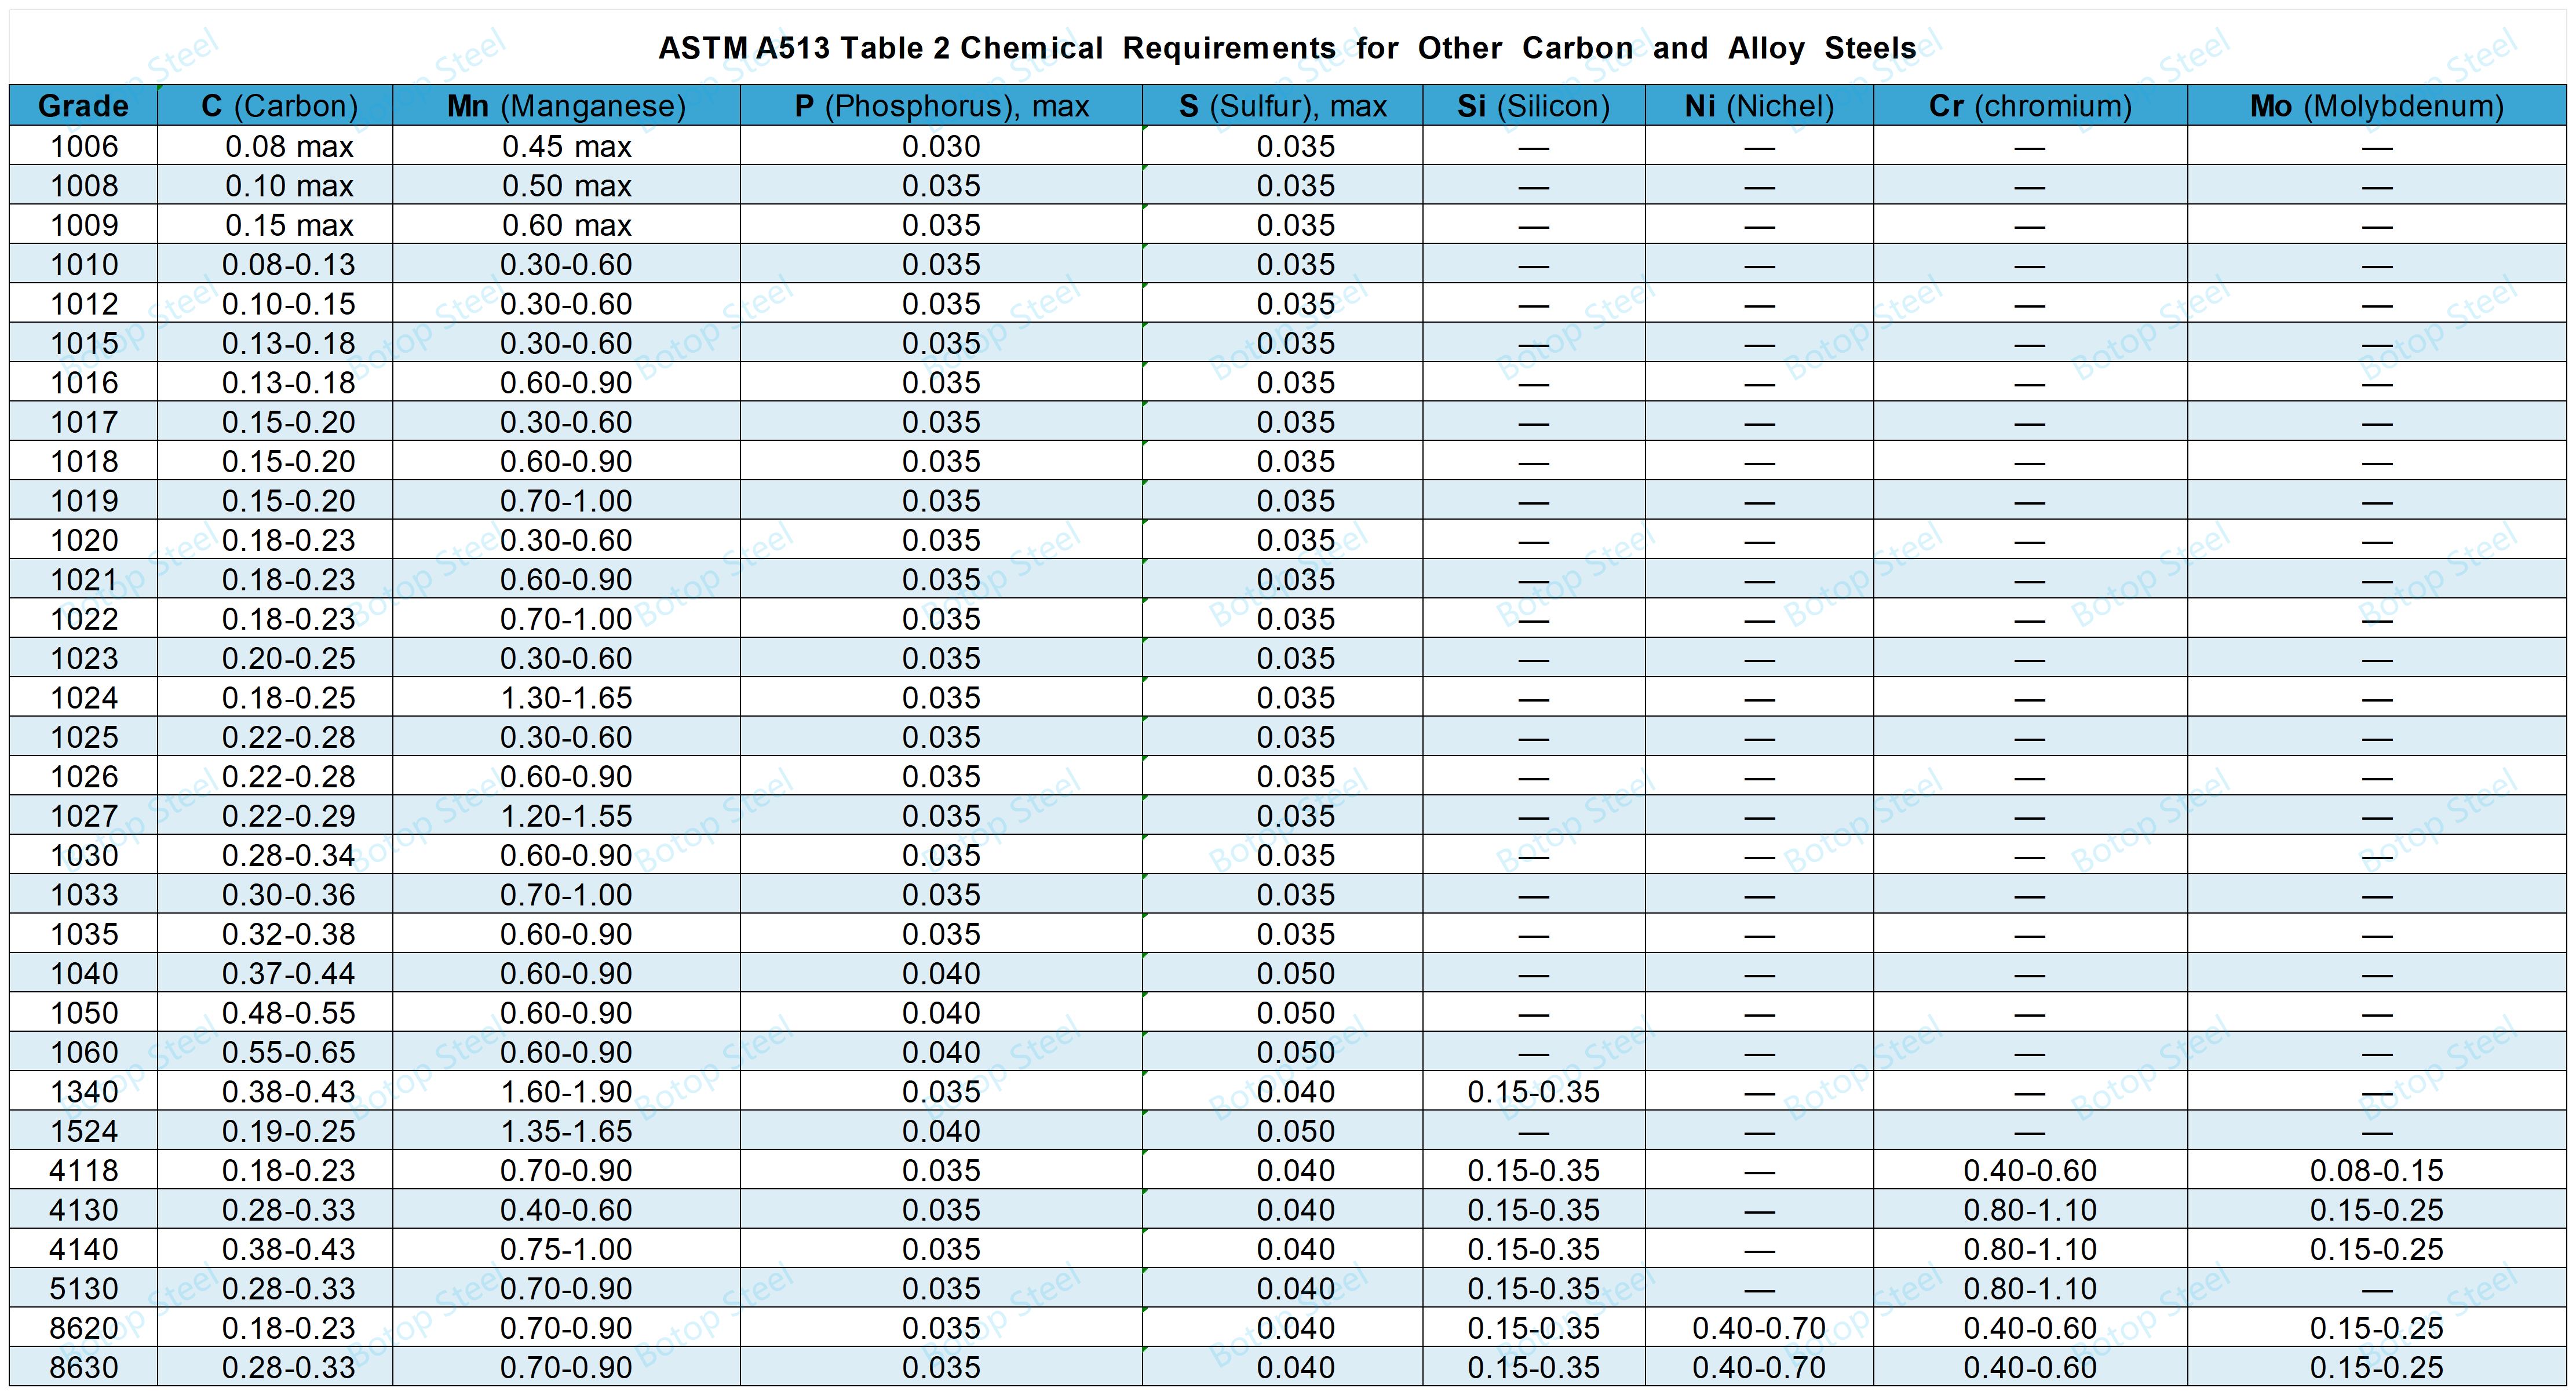 astm a513_Table 2 Chemical Requirements